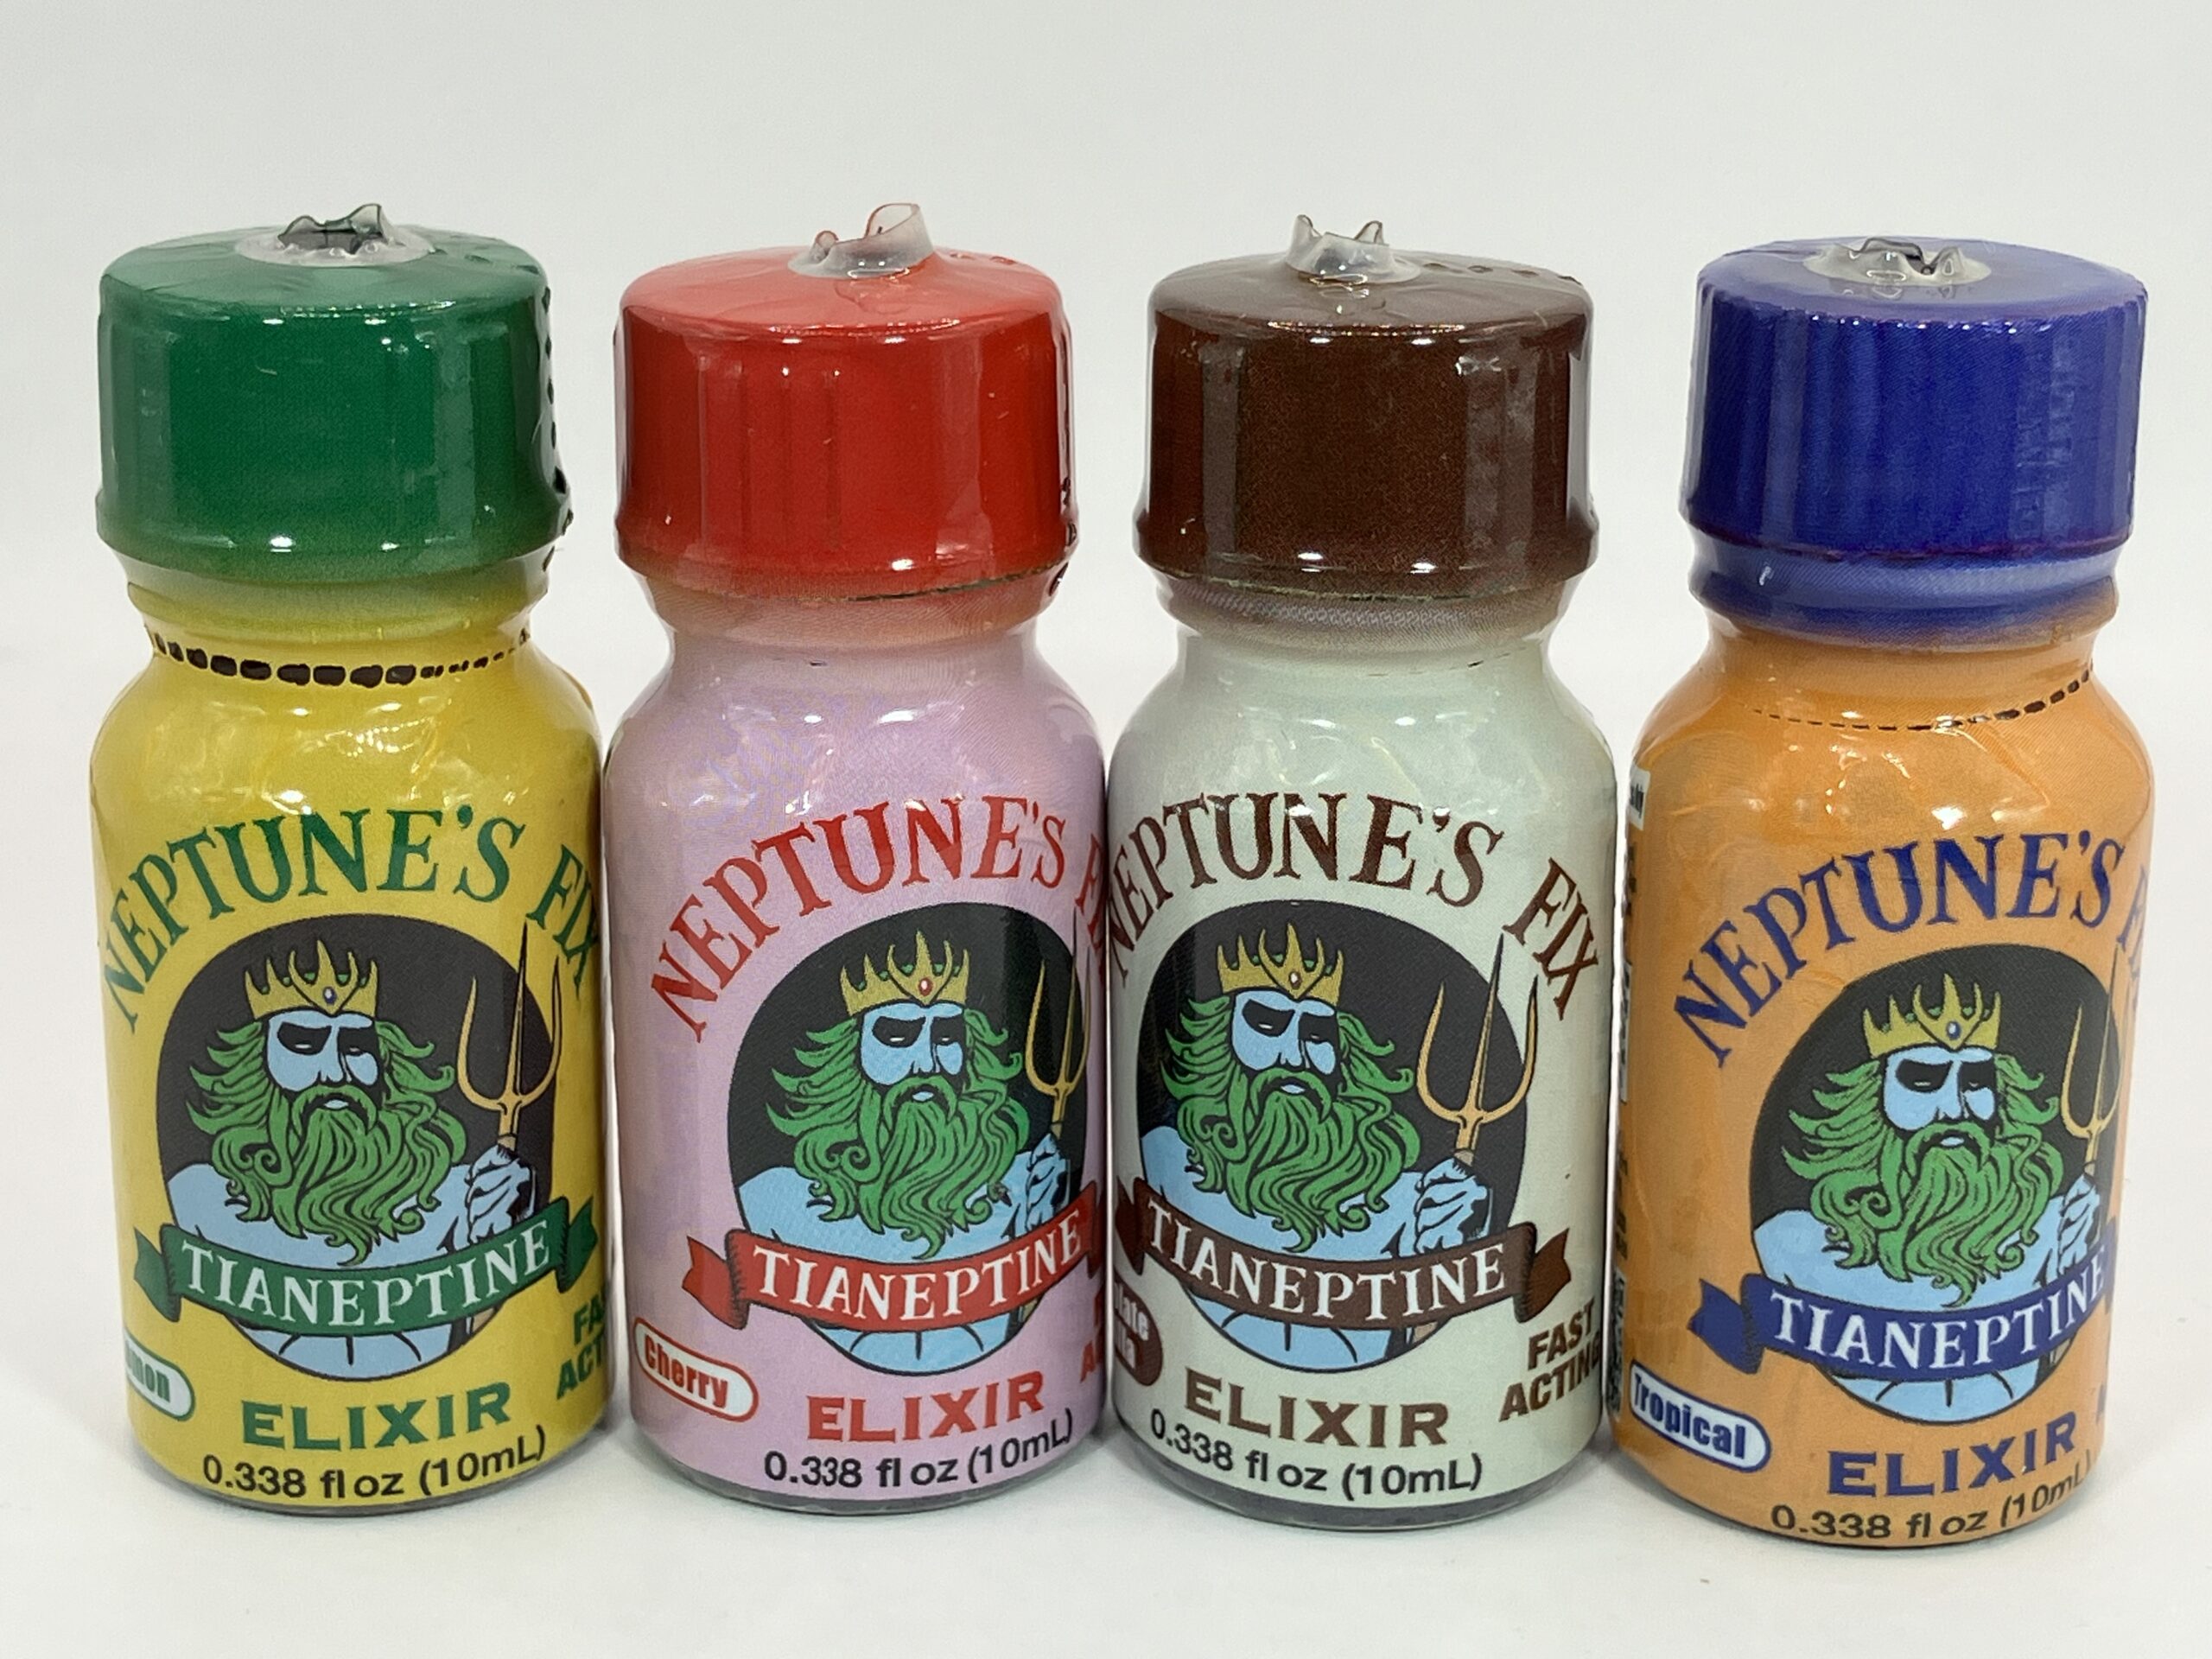 A closeup of brightly colored supplement bottles with "Neptune's Fix" labels